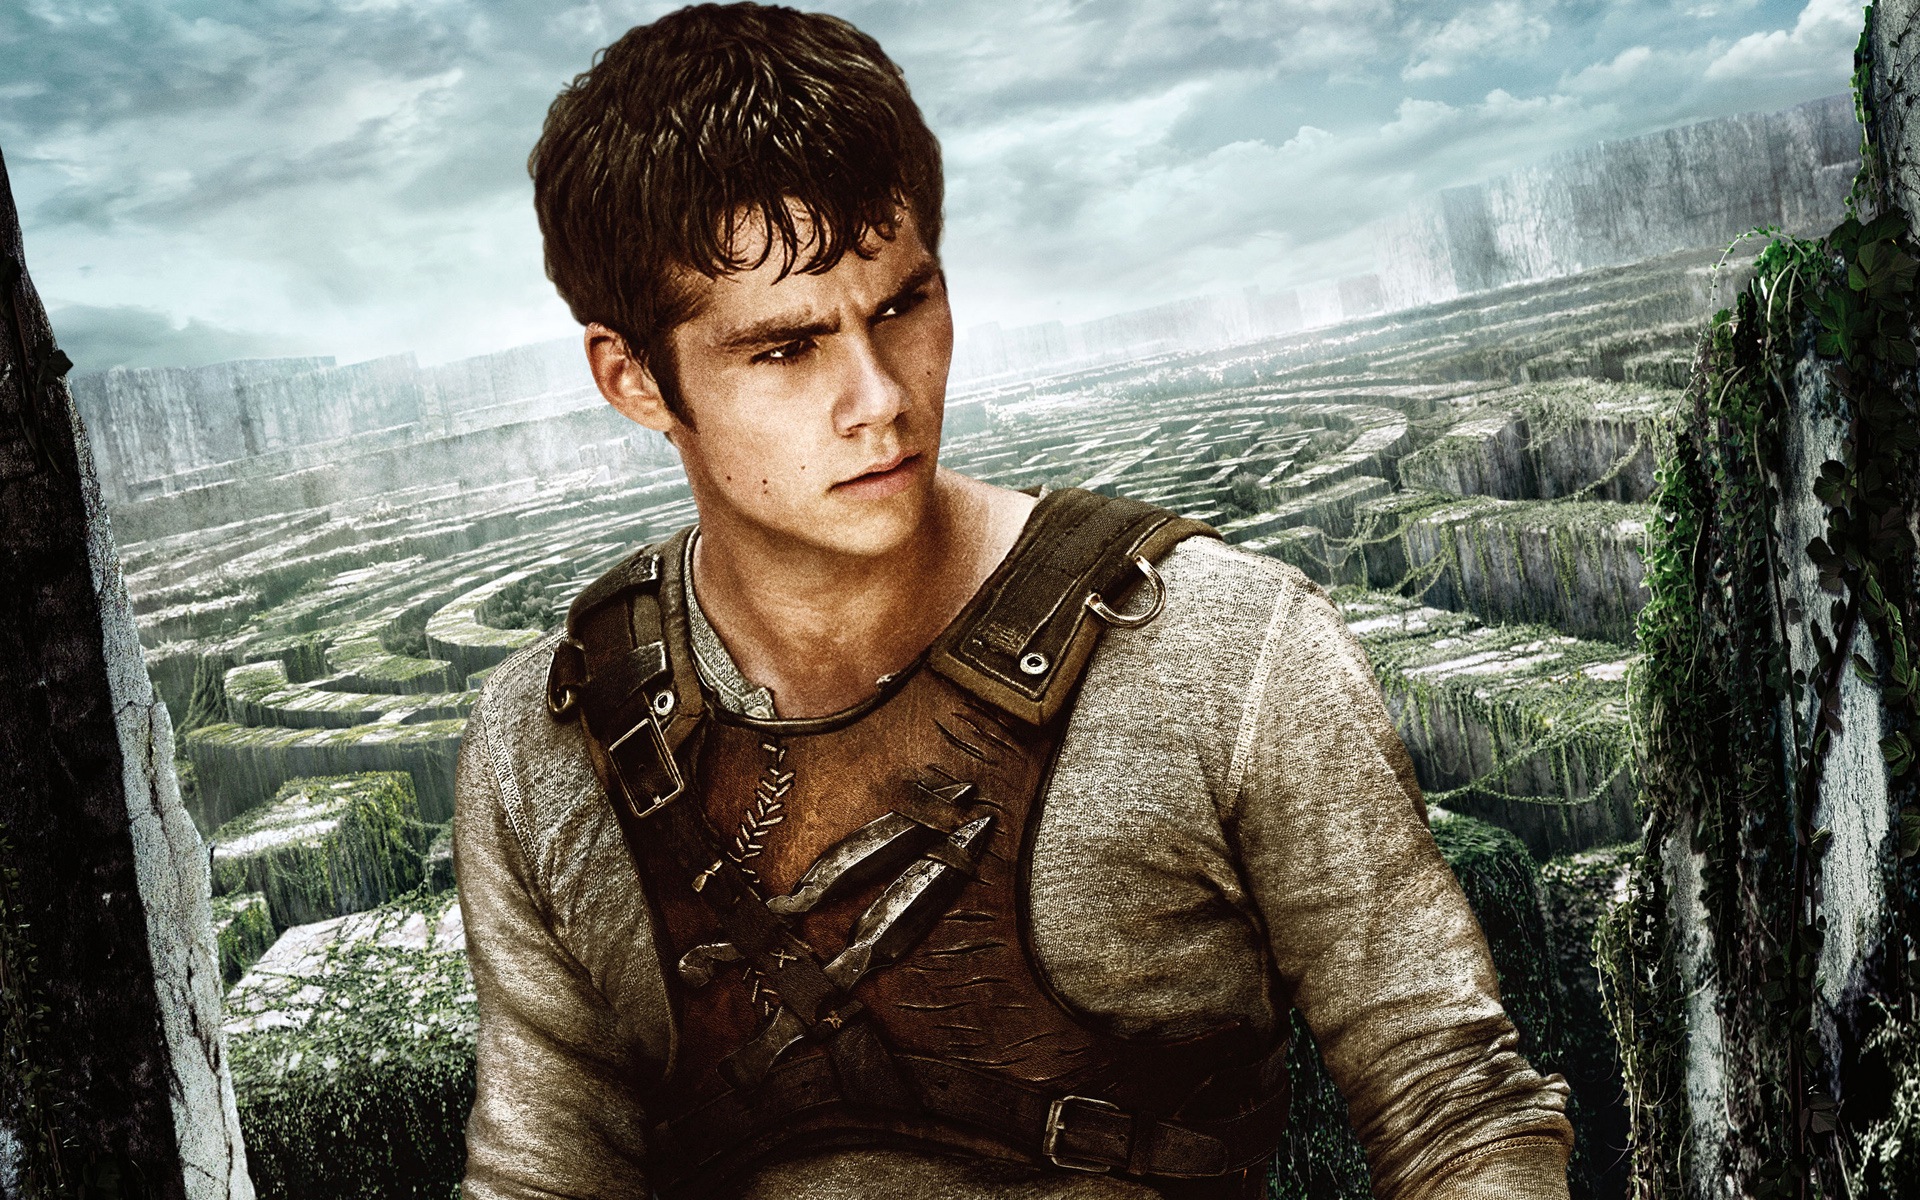 The Maze Runner HD movie wallpapers #7 - 1920x1200